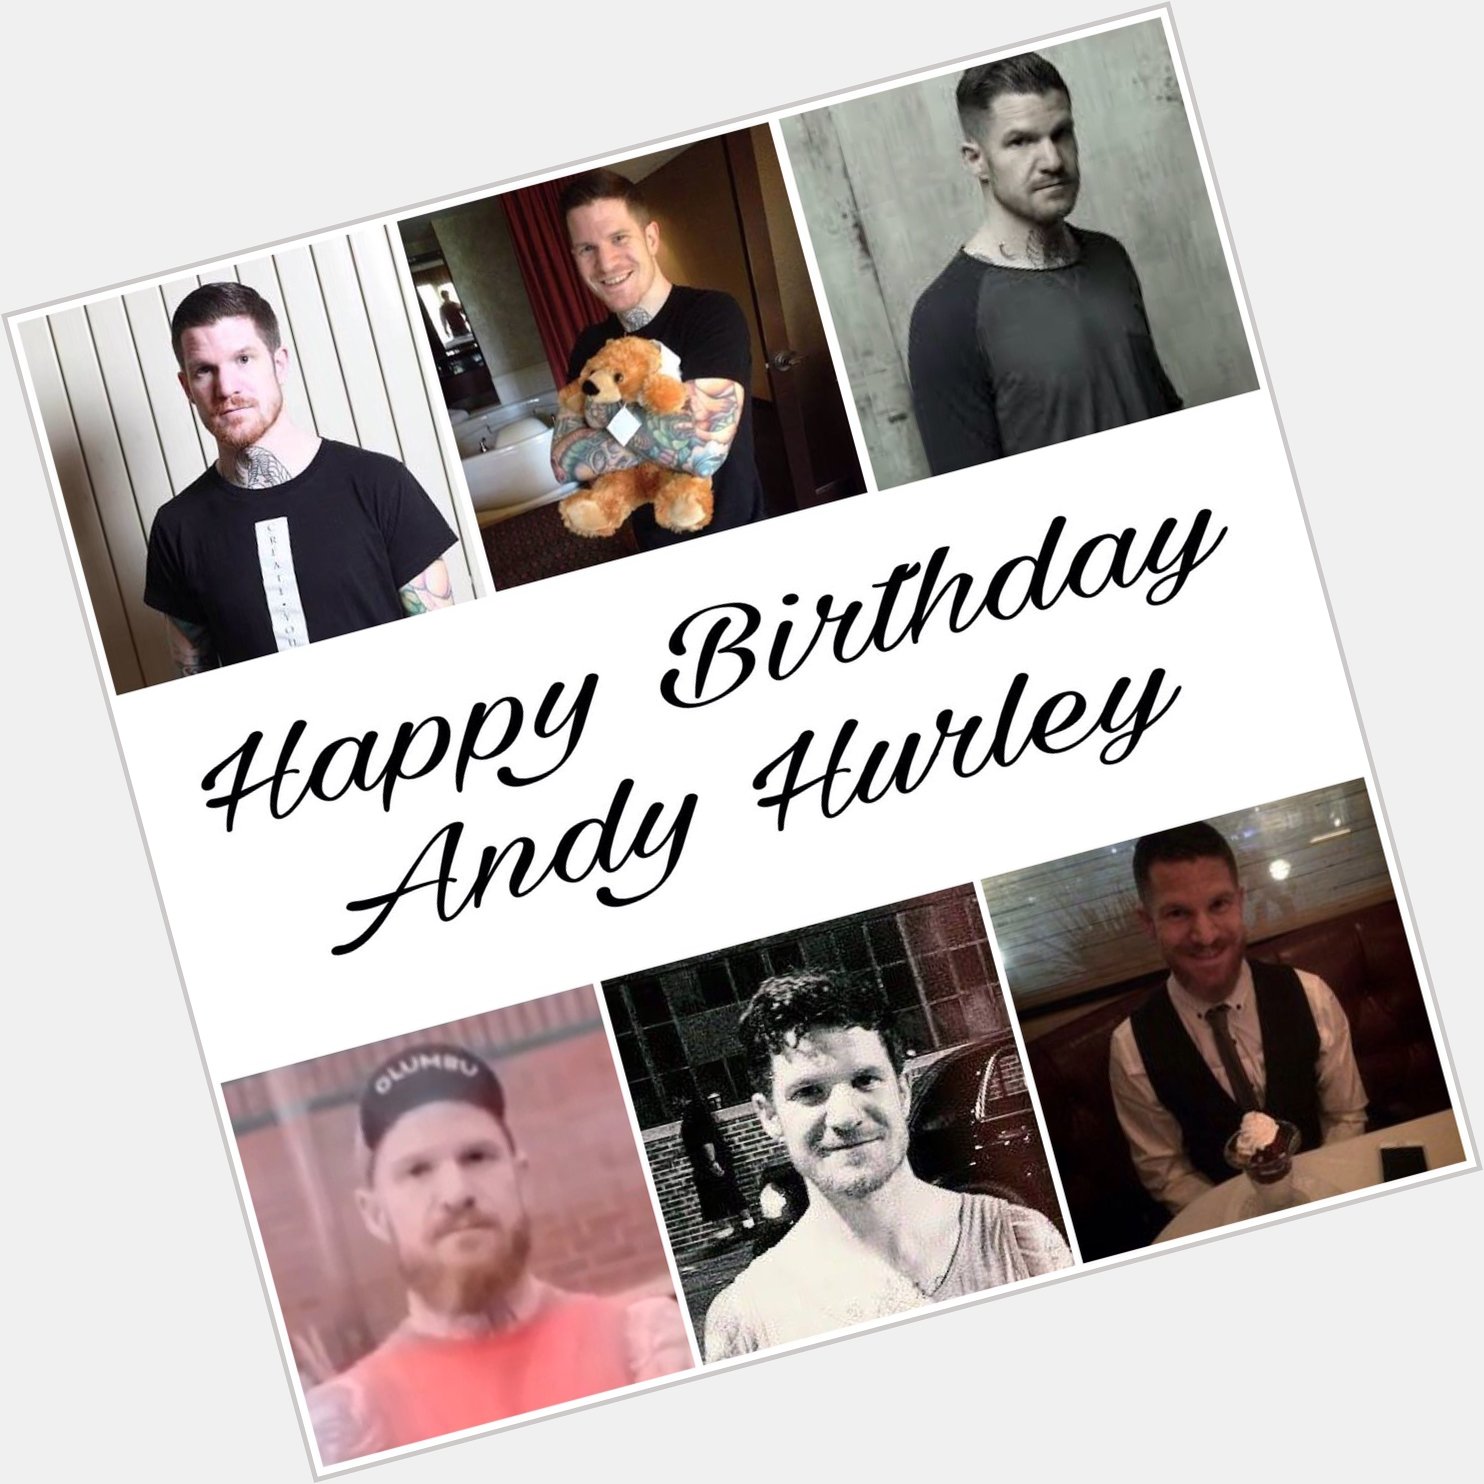 Its May 31 here already!!  HAPPY BIRTHDAY ANDY HURLEY!!!  one of the most cutest human beings in the whole world 